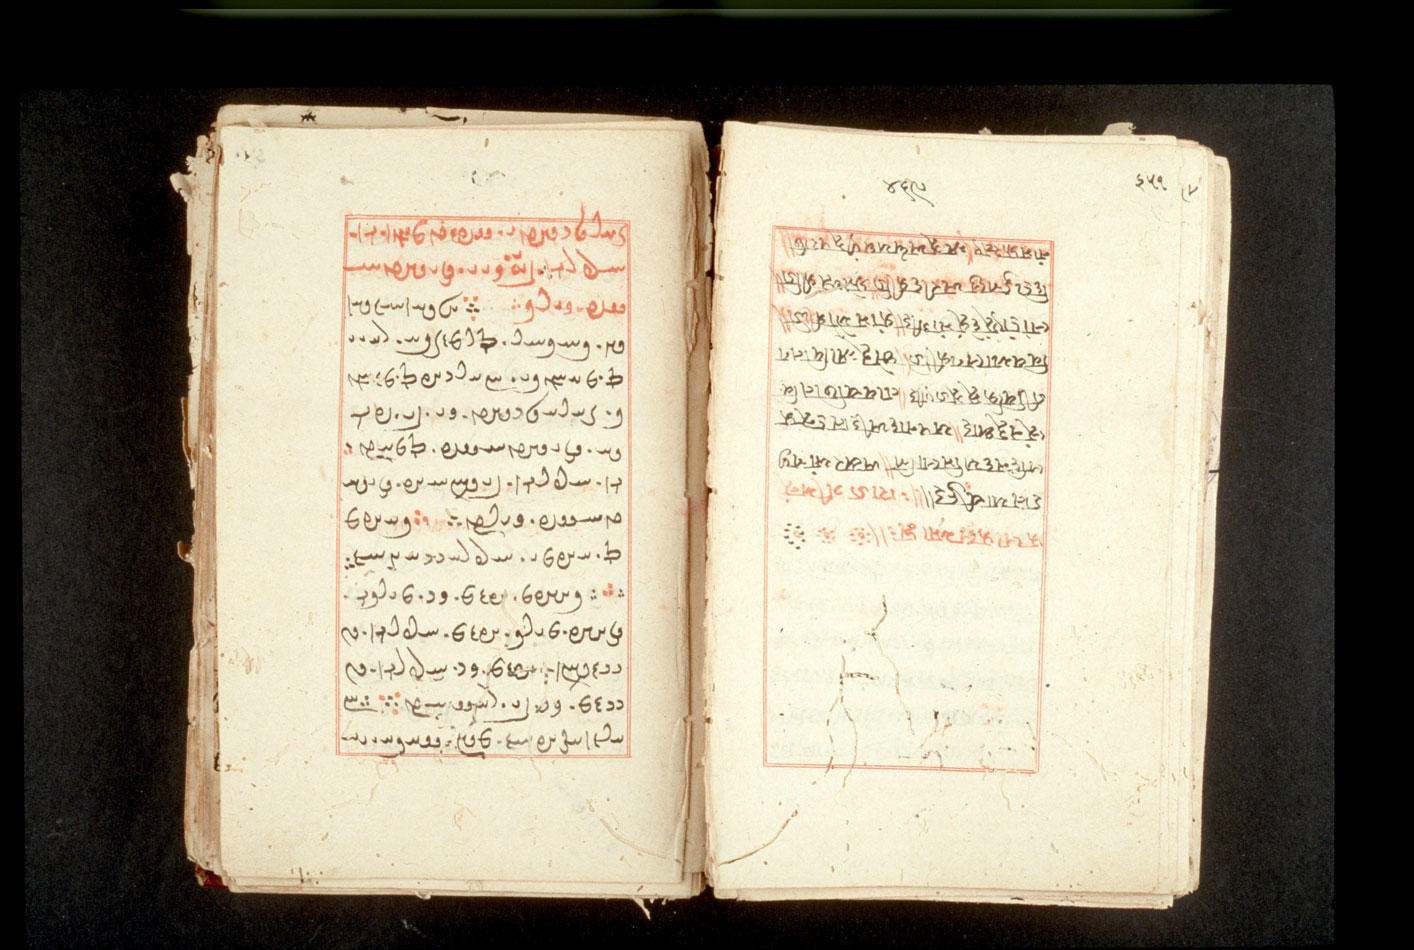 Folios 469v (right) and 470r (left)